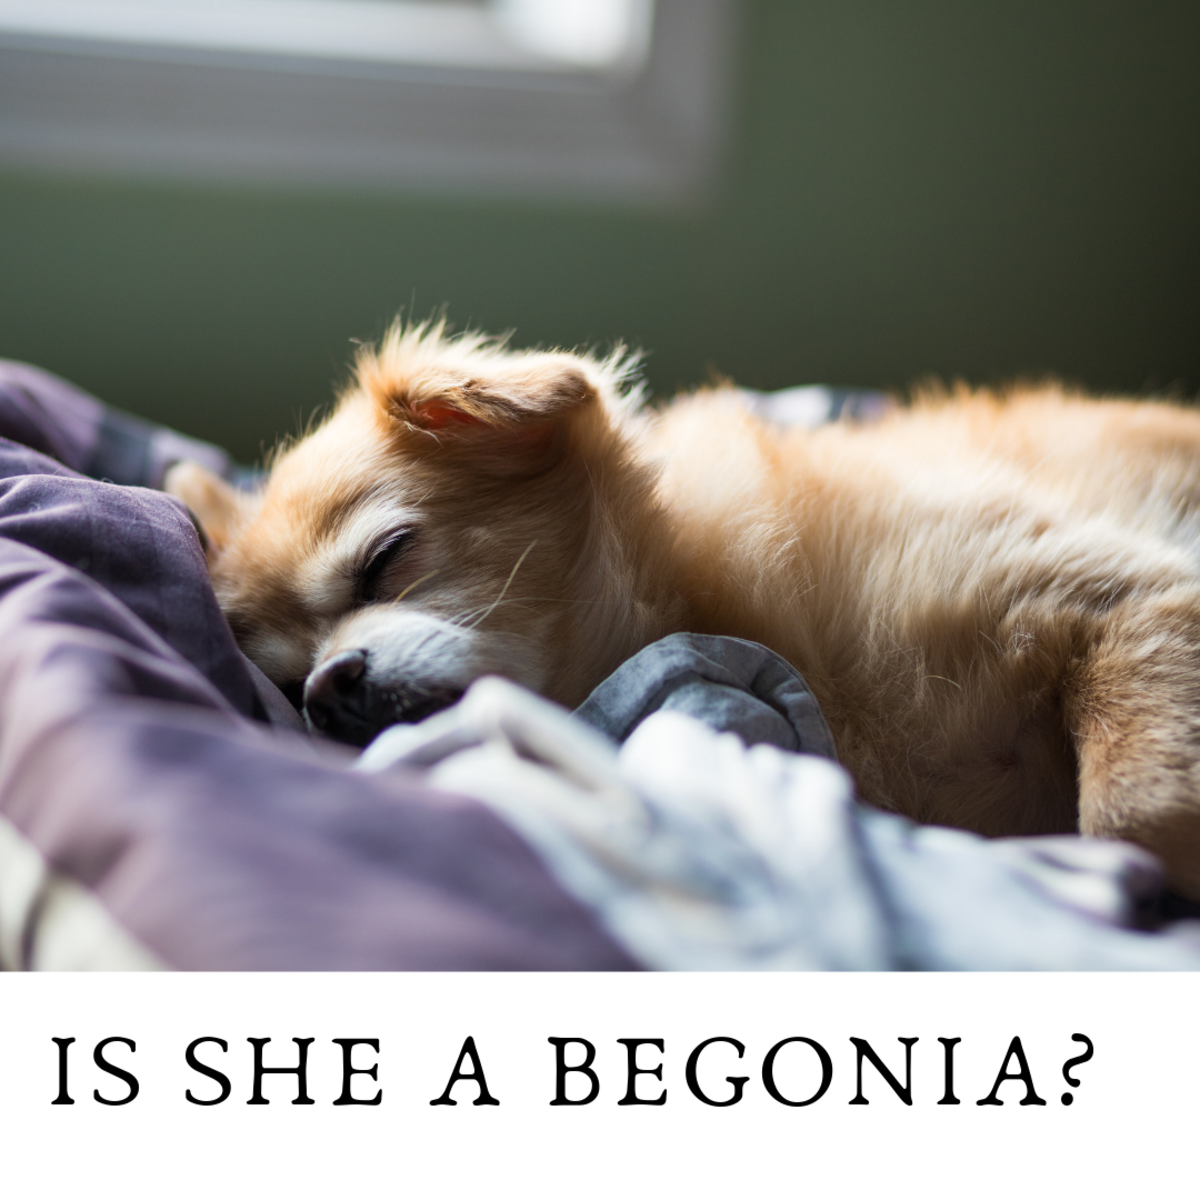 Take your dog's personality into account when deciding on a
name.